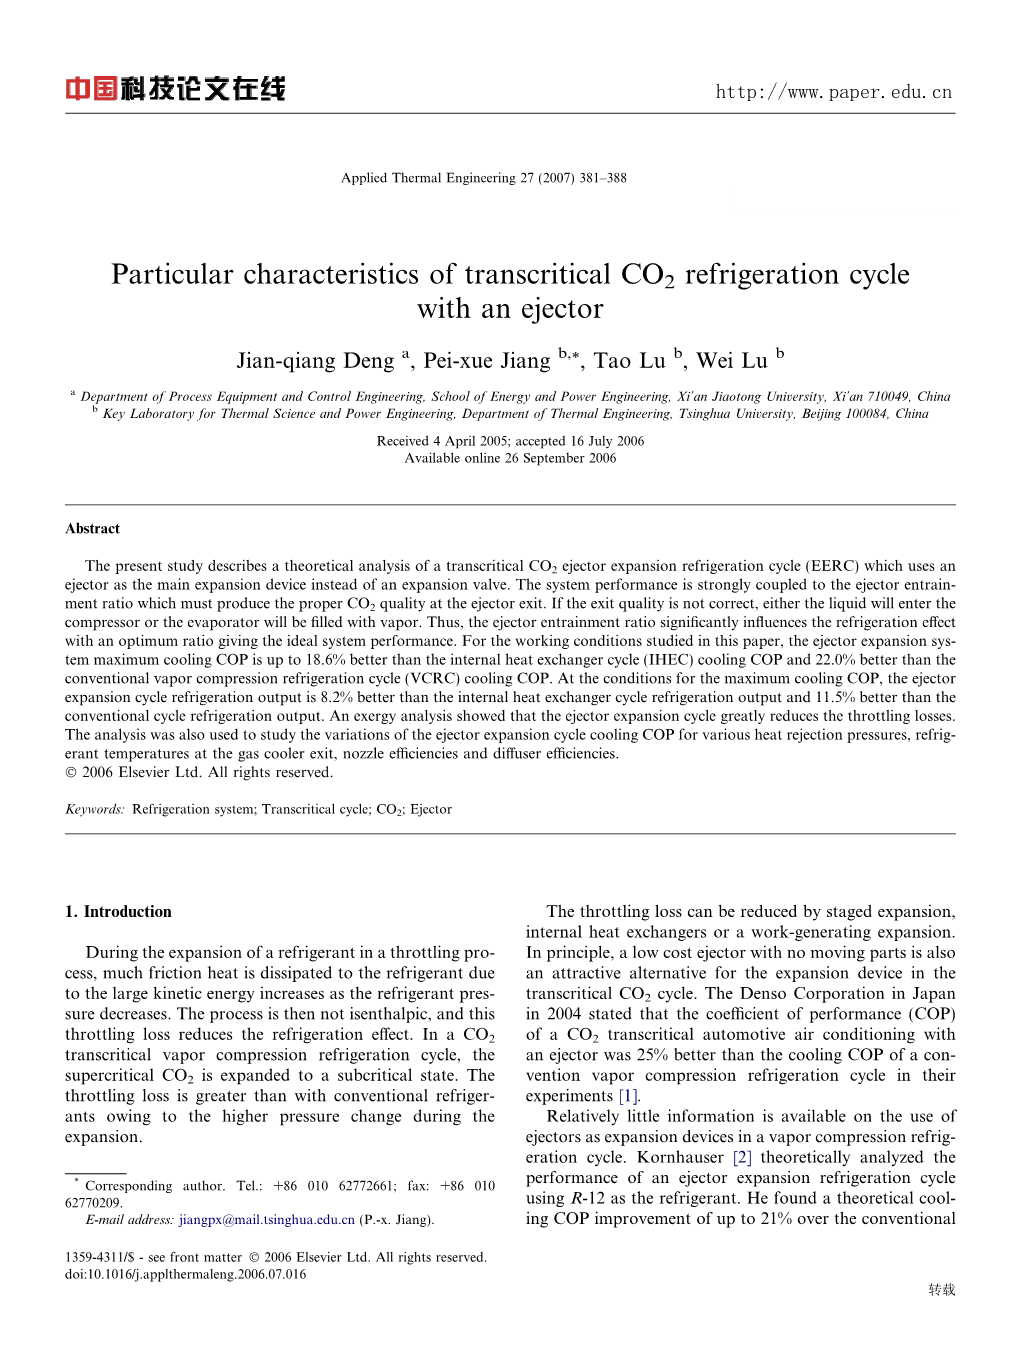 Particular Characteristics of Transcritical CO2 Refrigeration Cycle with an Ejector